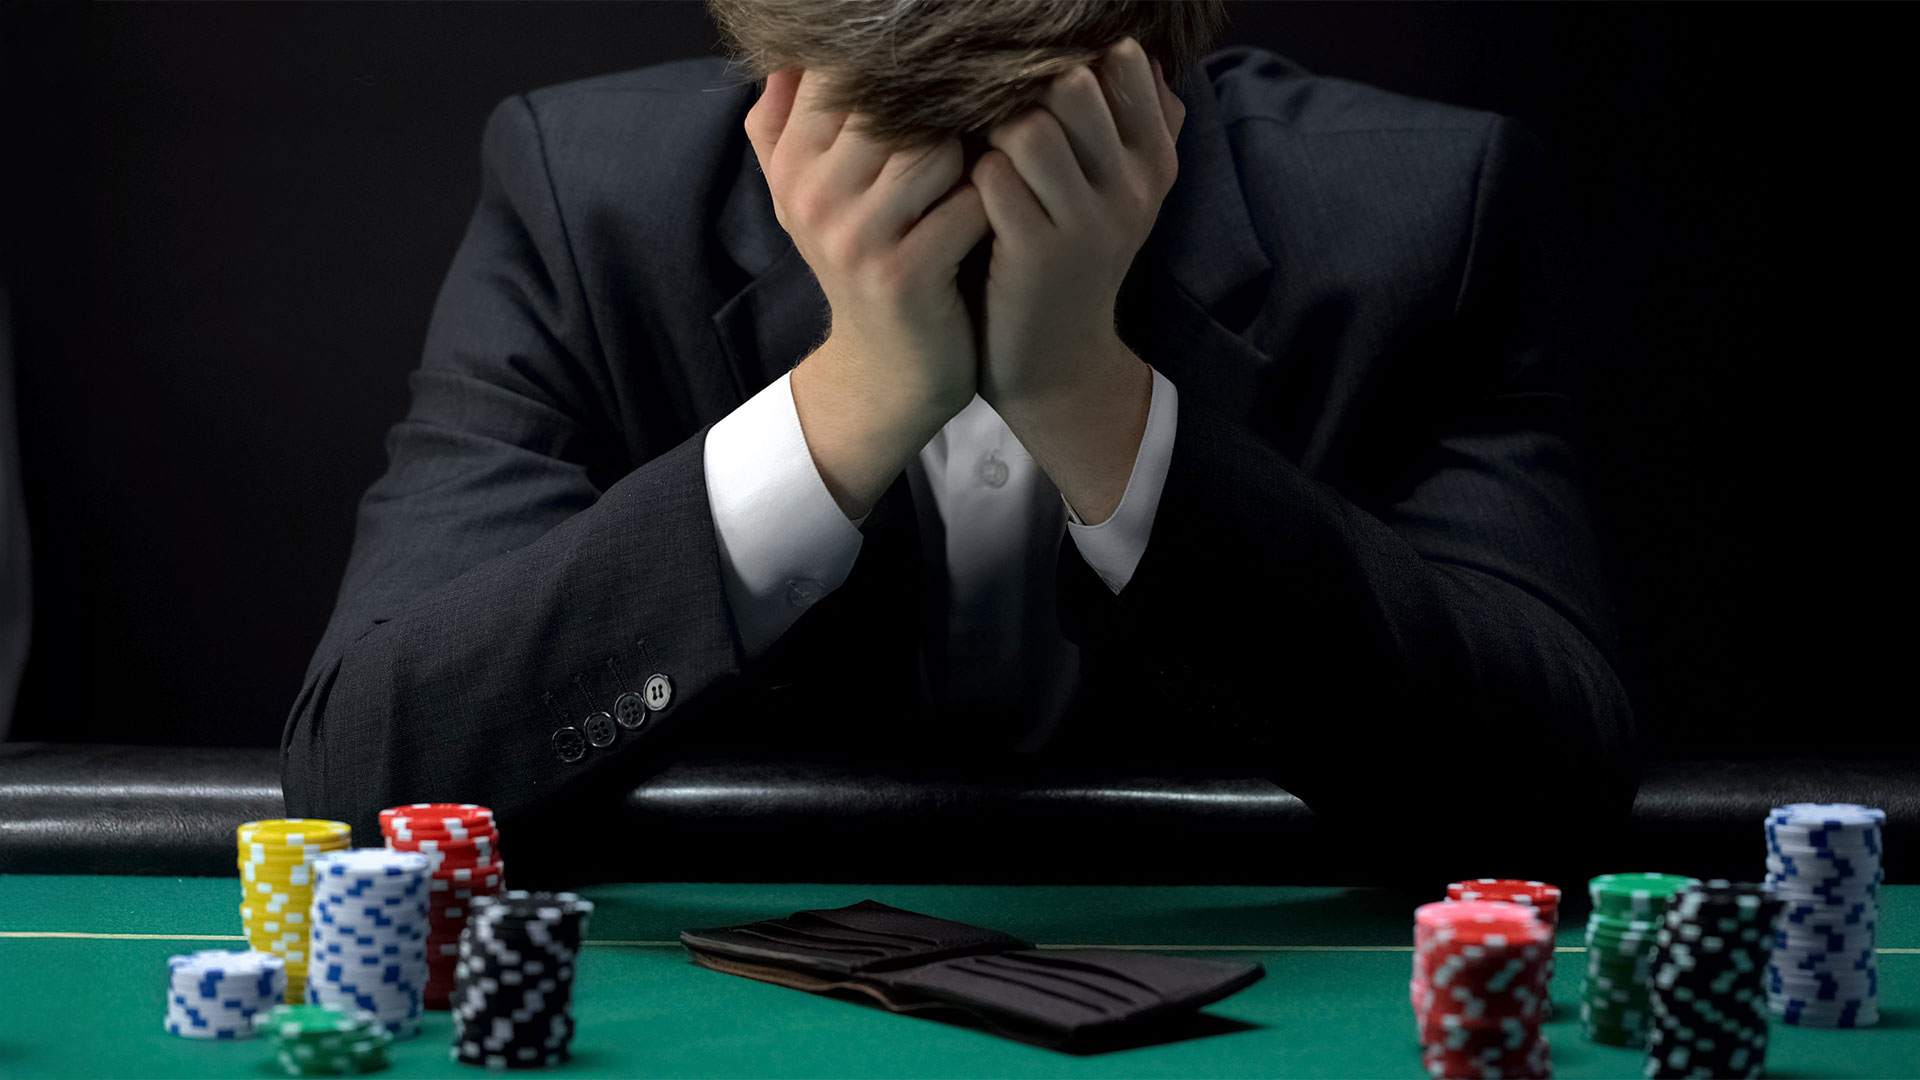 Against the Odds: A gambling addiction can destroy your health, wealth and personal relationships